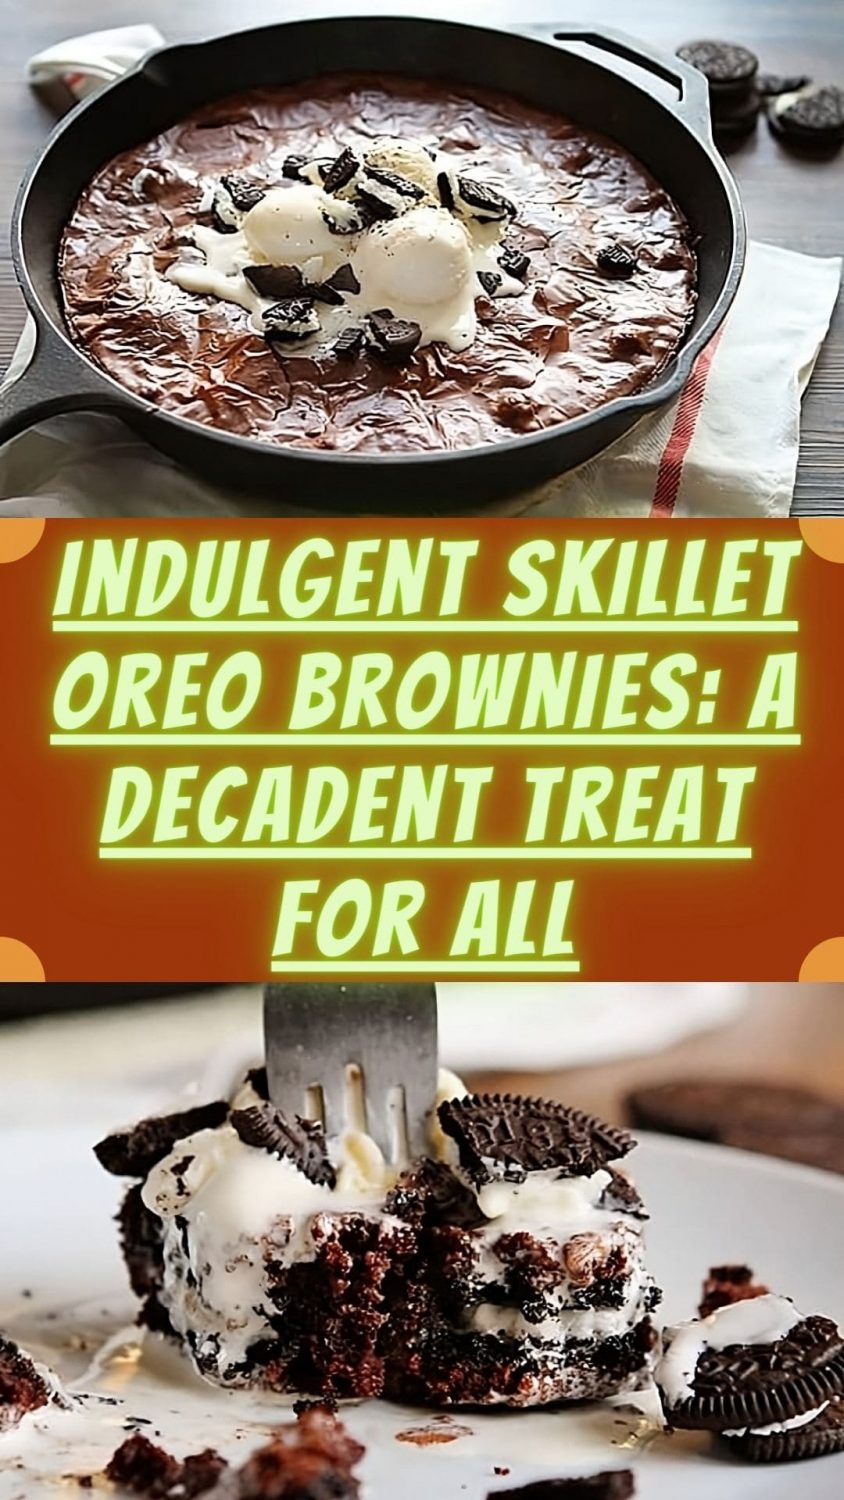 Indulgent Skillet Oreo Brownies: A Decadent Treat for All